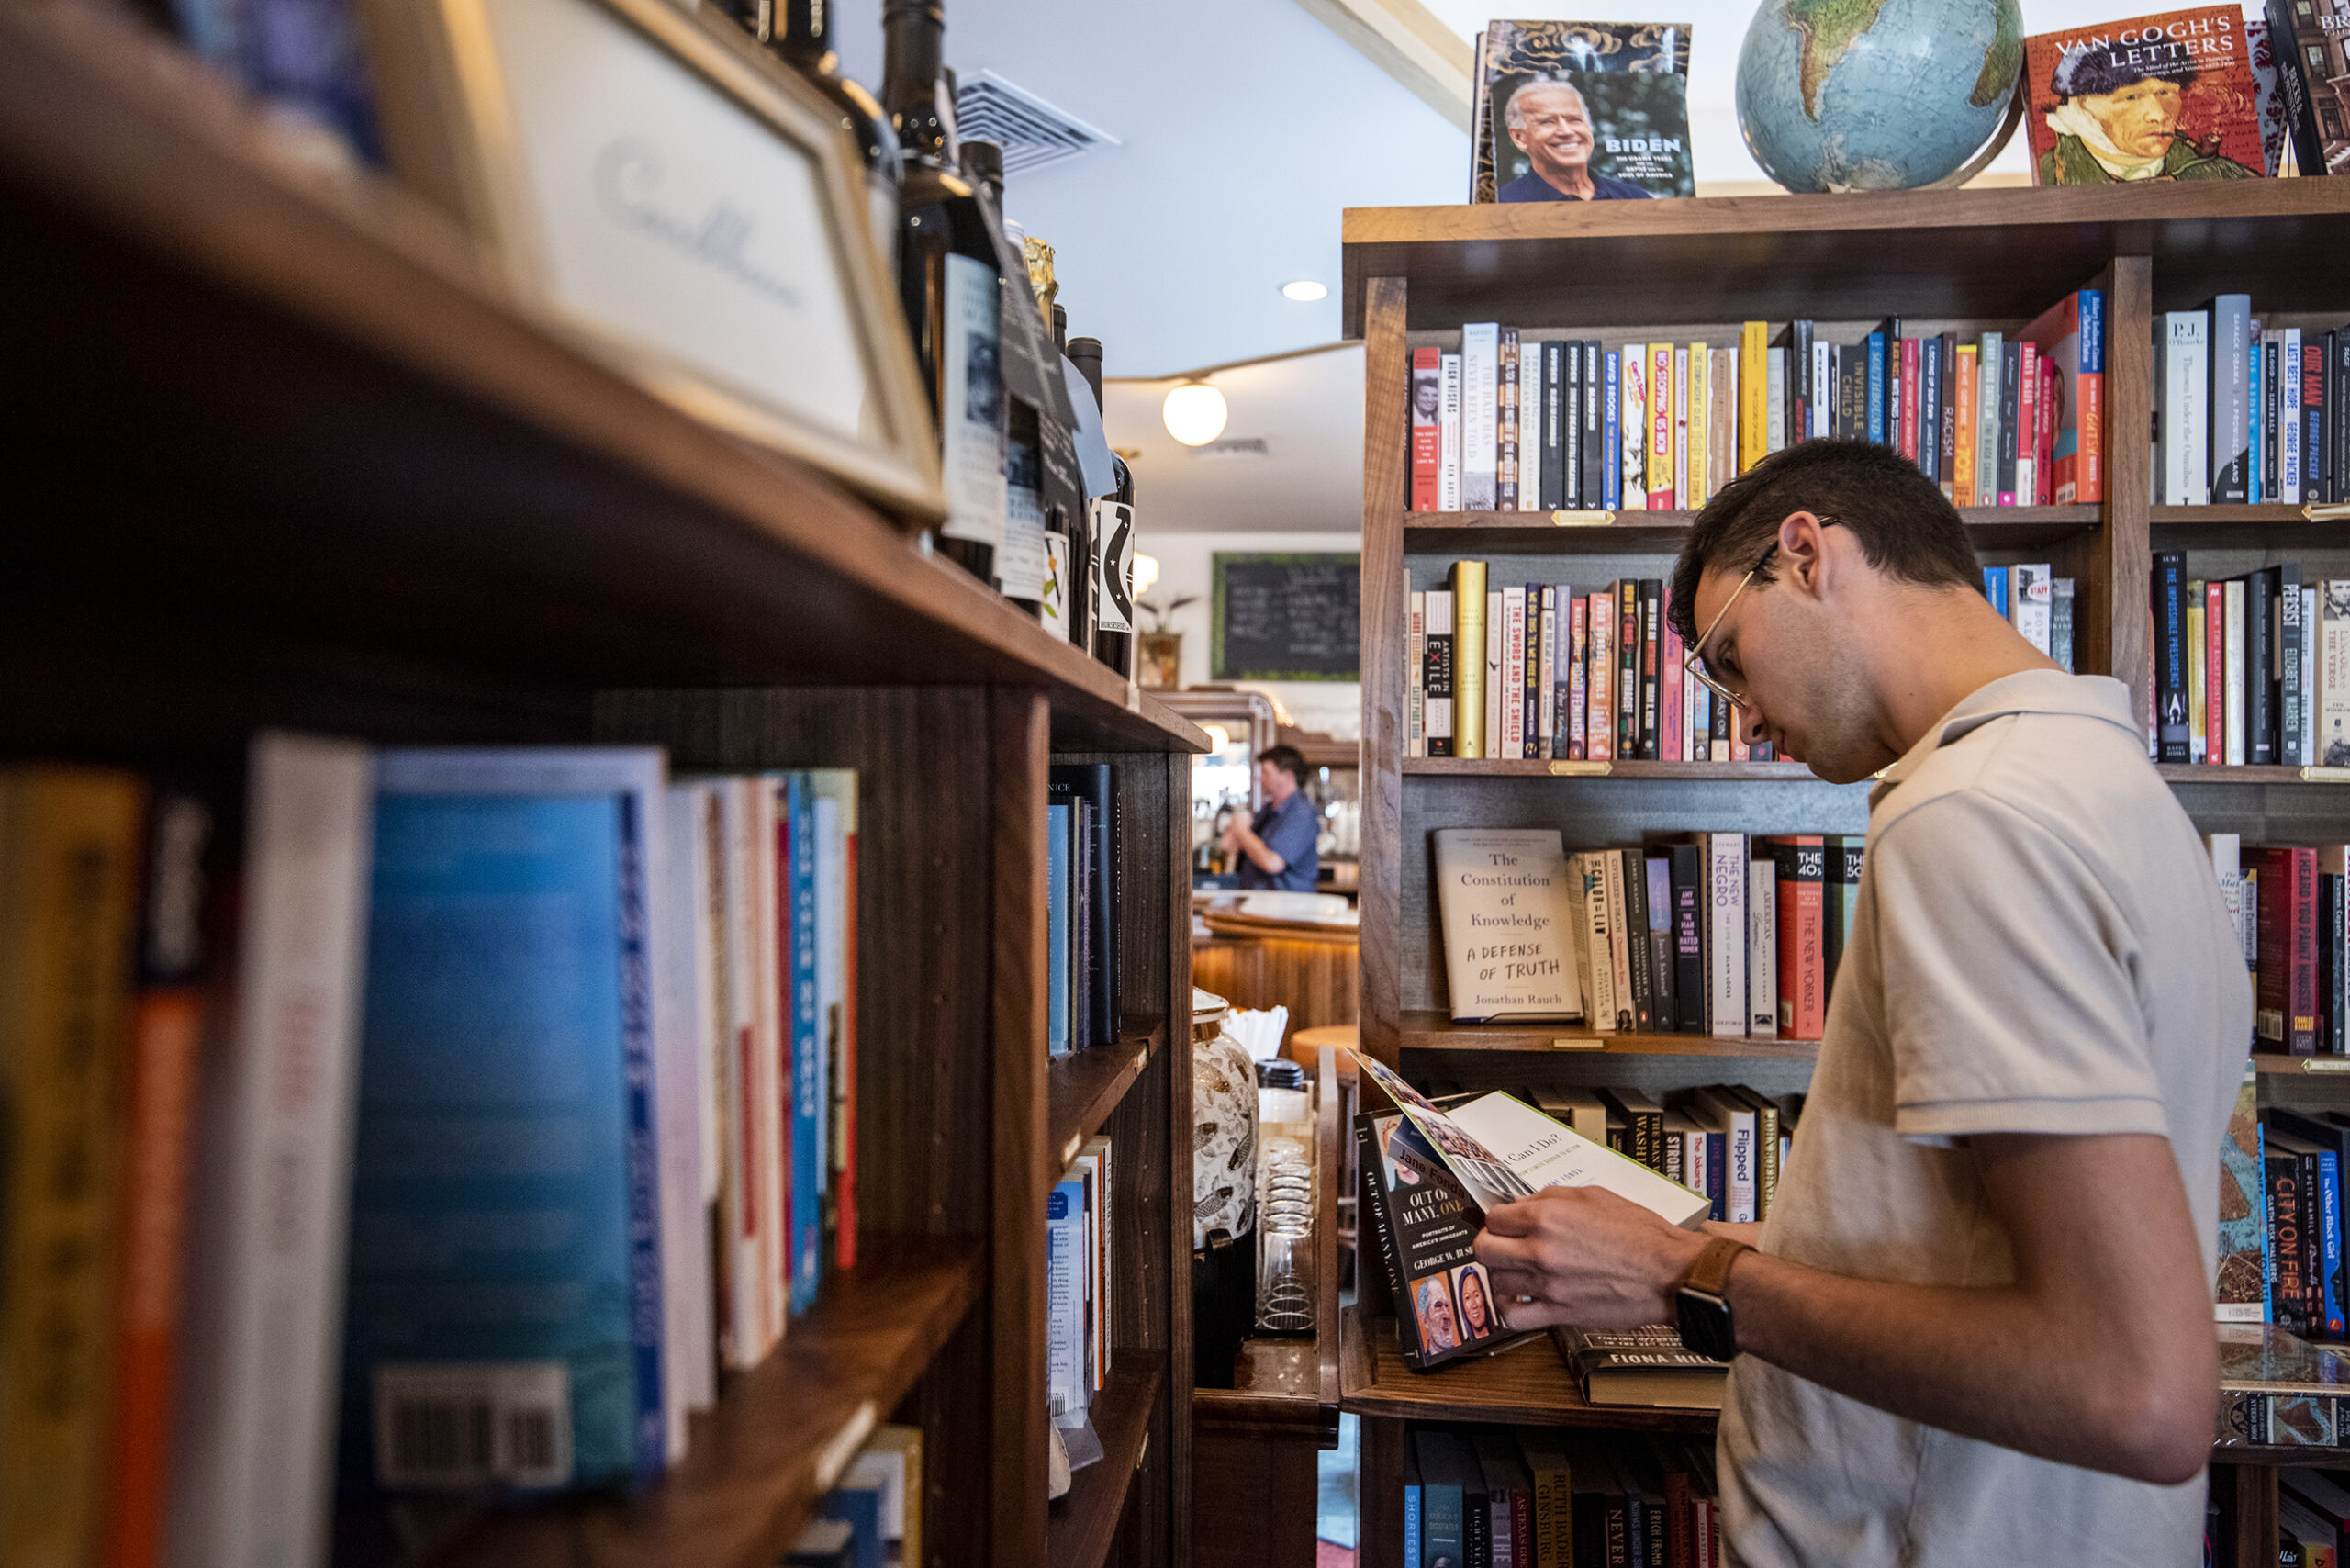 A customer opens a book to look at it while surrounded by books on shelves.